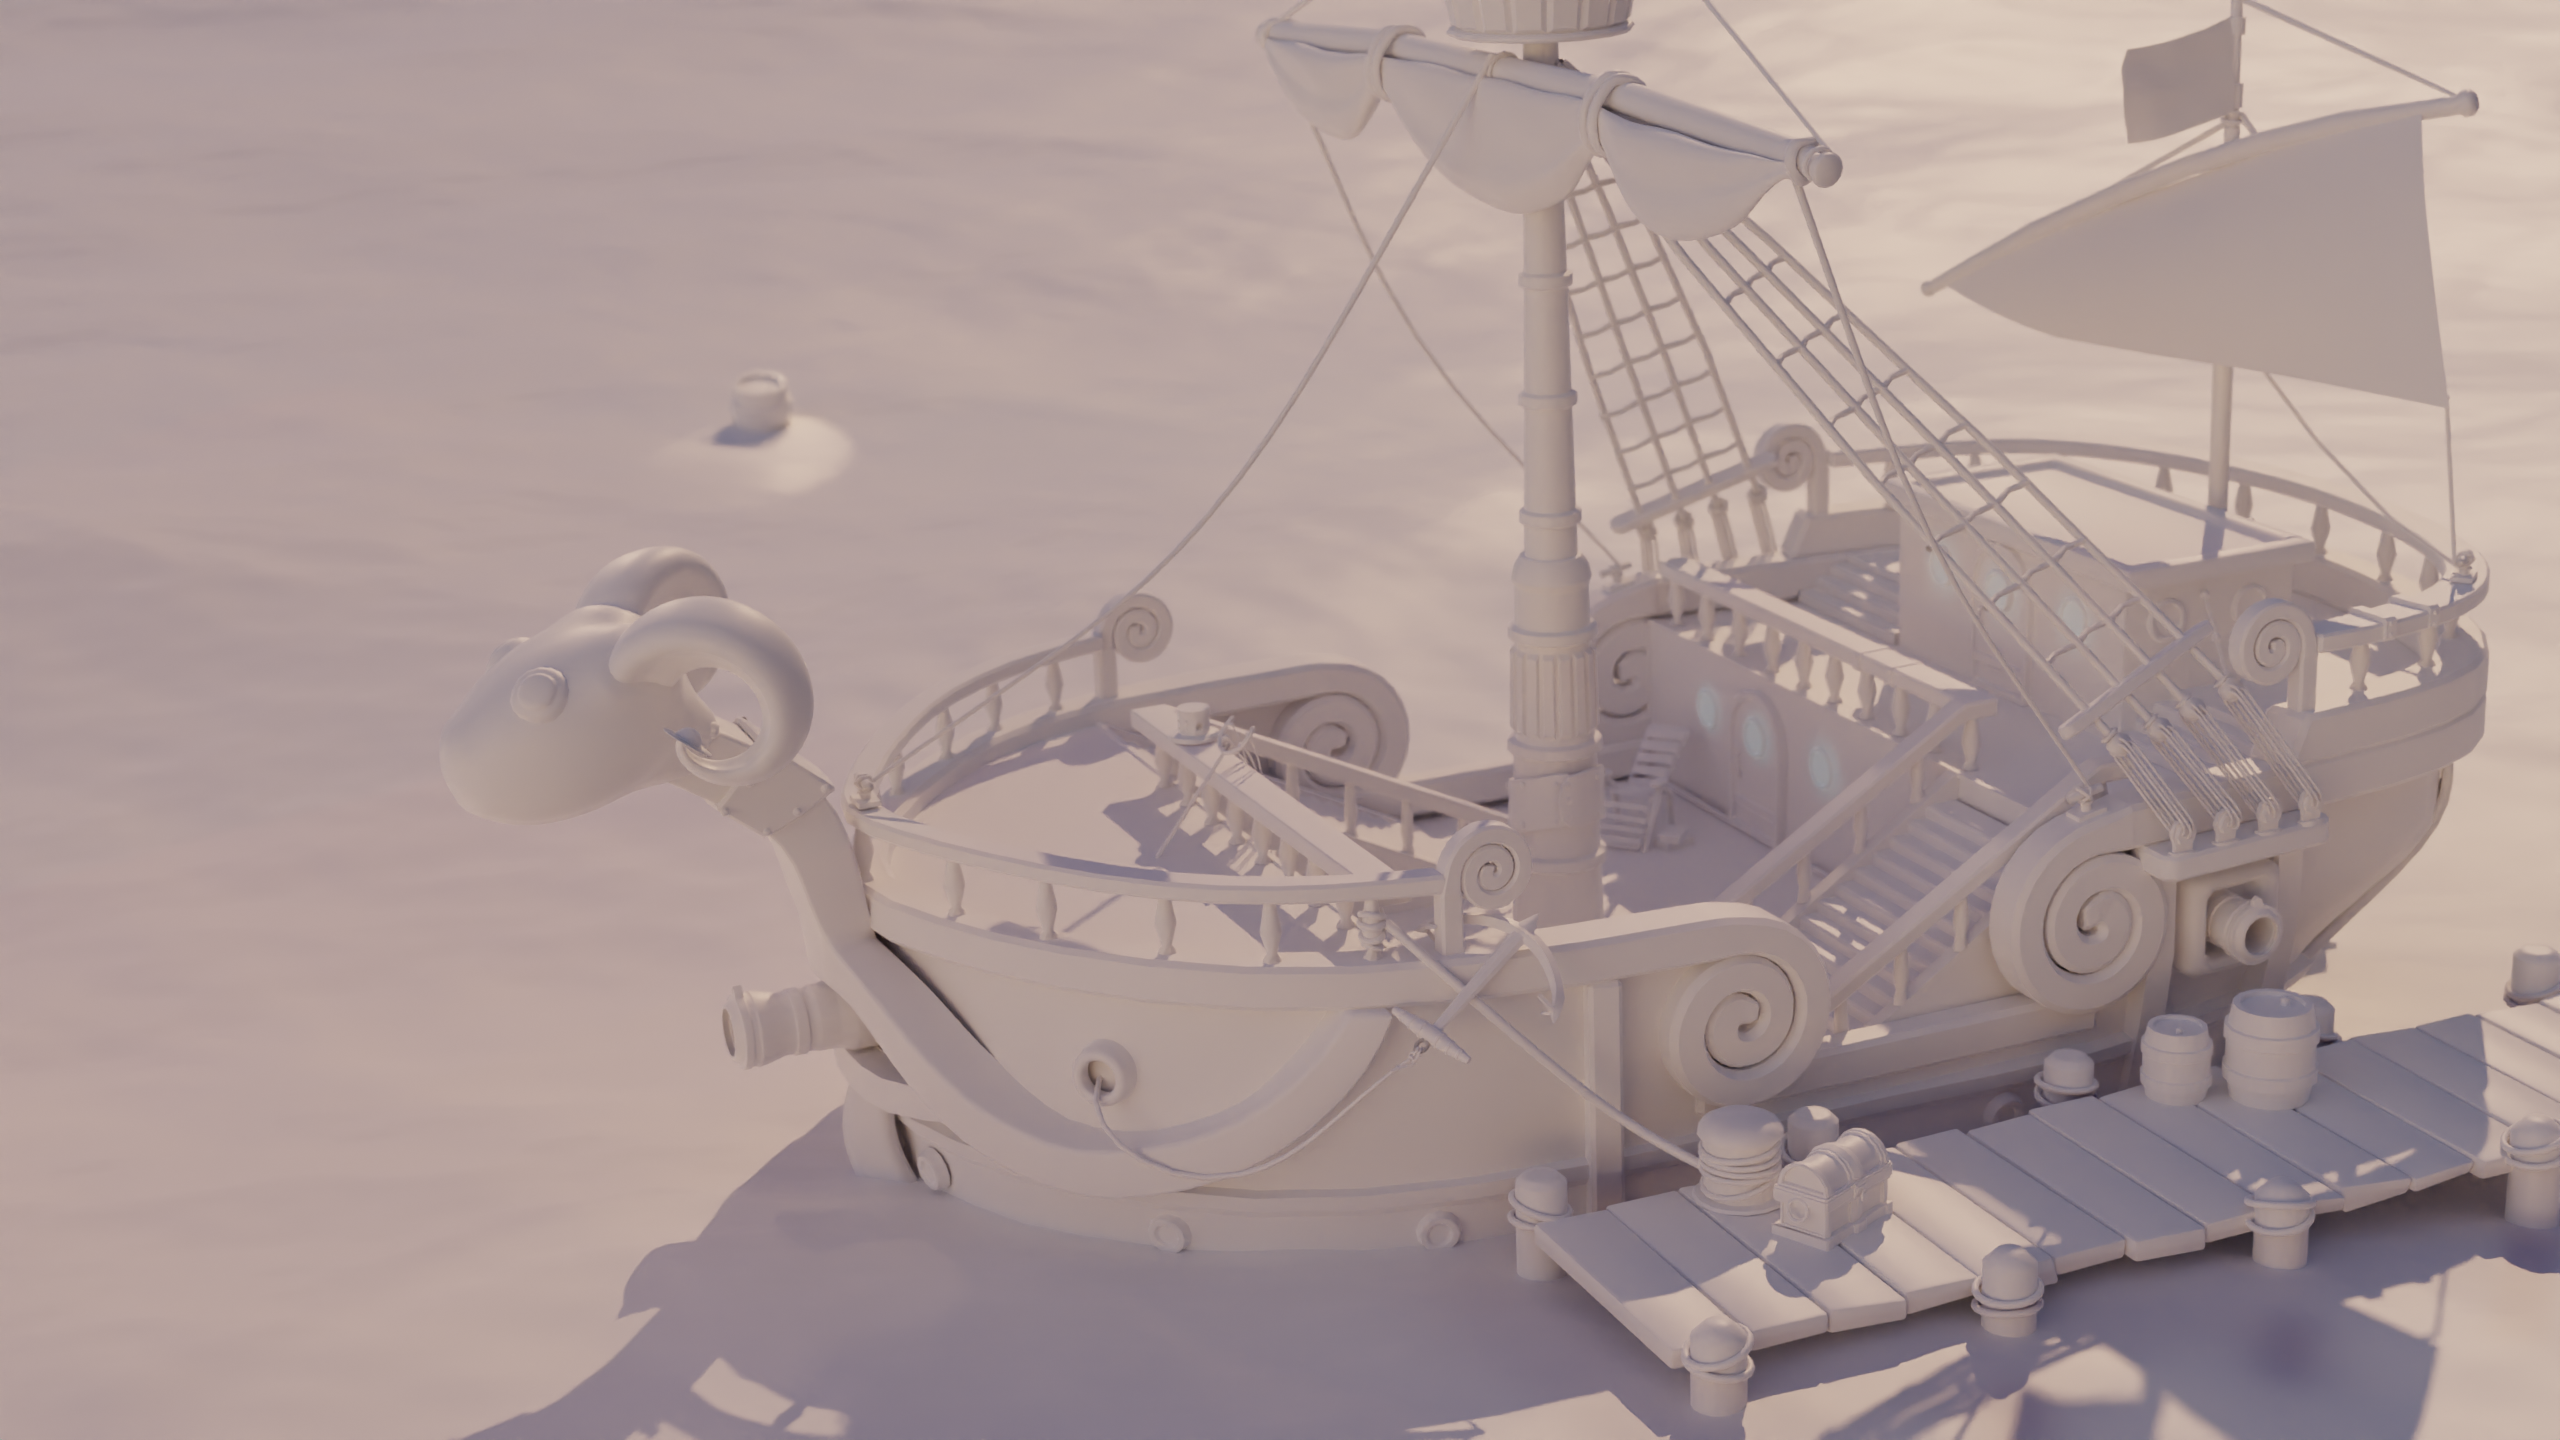 Finally done with going merry(from one piece) after around 40-60 hours.  Would love some feeback - Finished Projects - Blender Artists Community